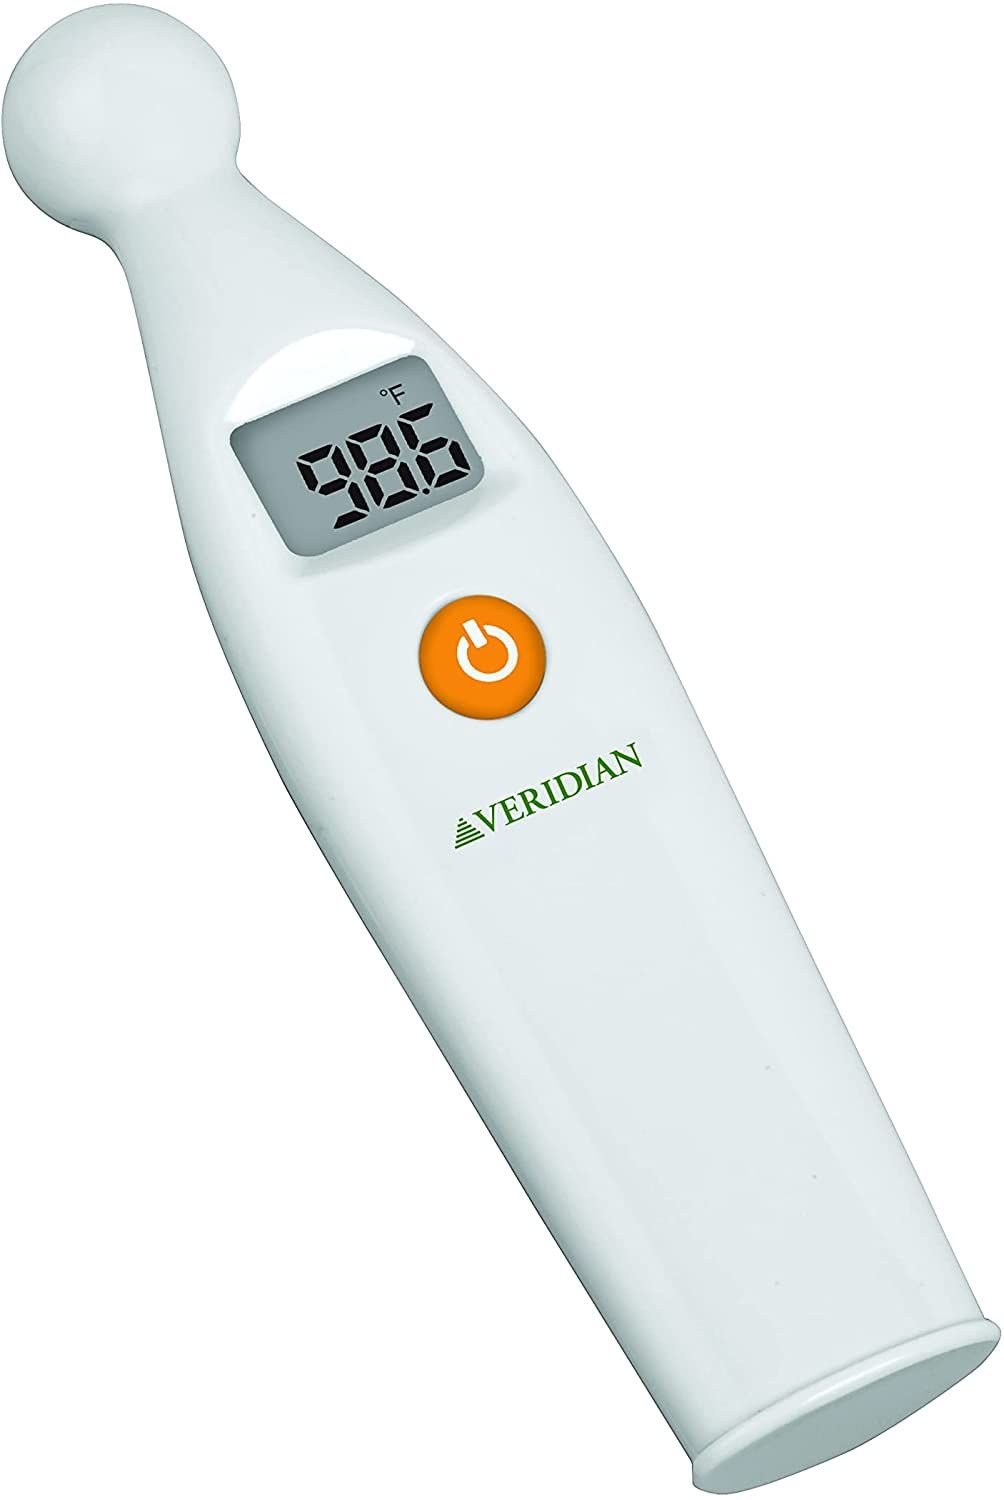 Veridian Temple Infrared Thermometer